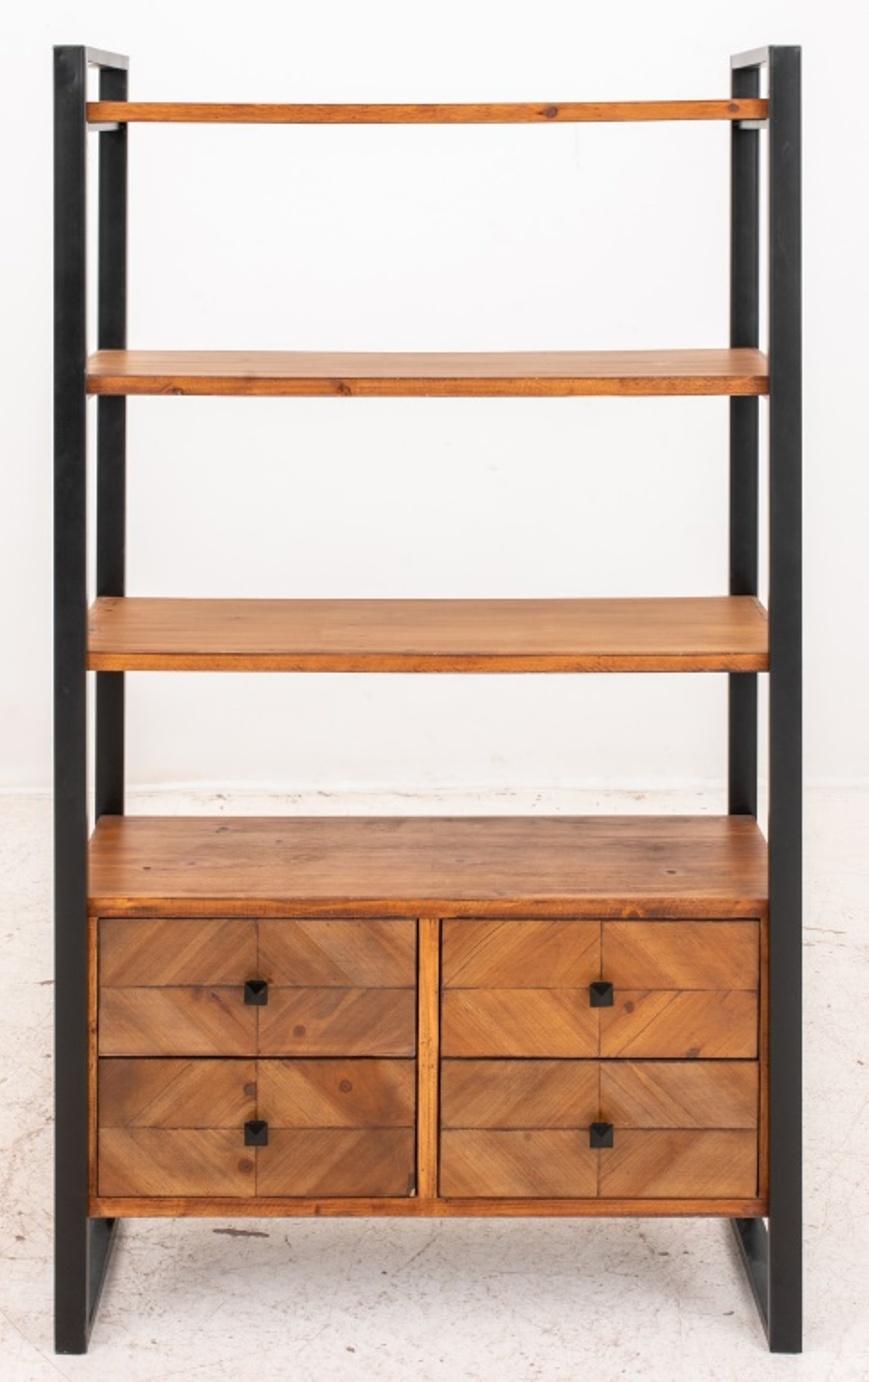 Industrial loft style bookcase have ebonized metal frame and wooden shelves upon four drawers.

Dimensions: 63.5